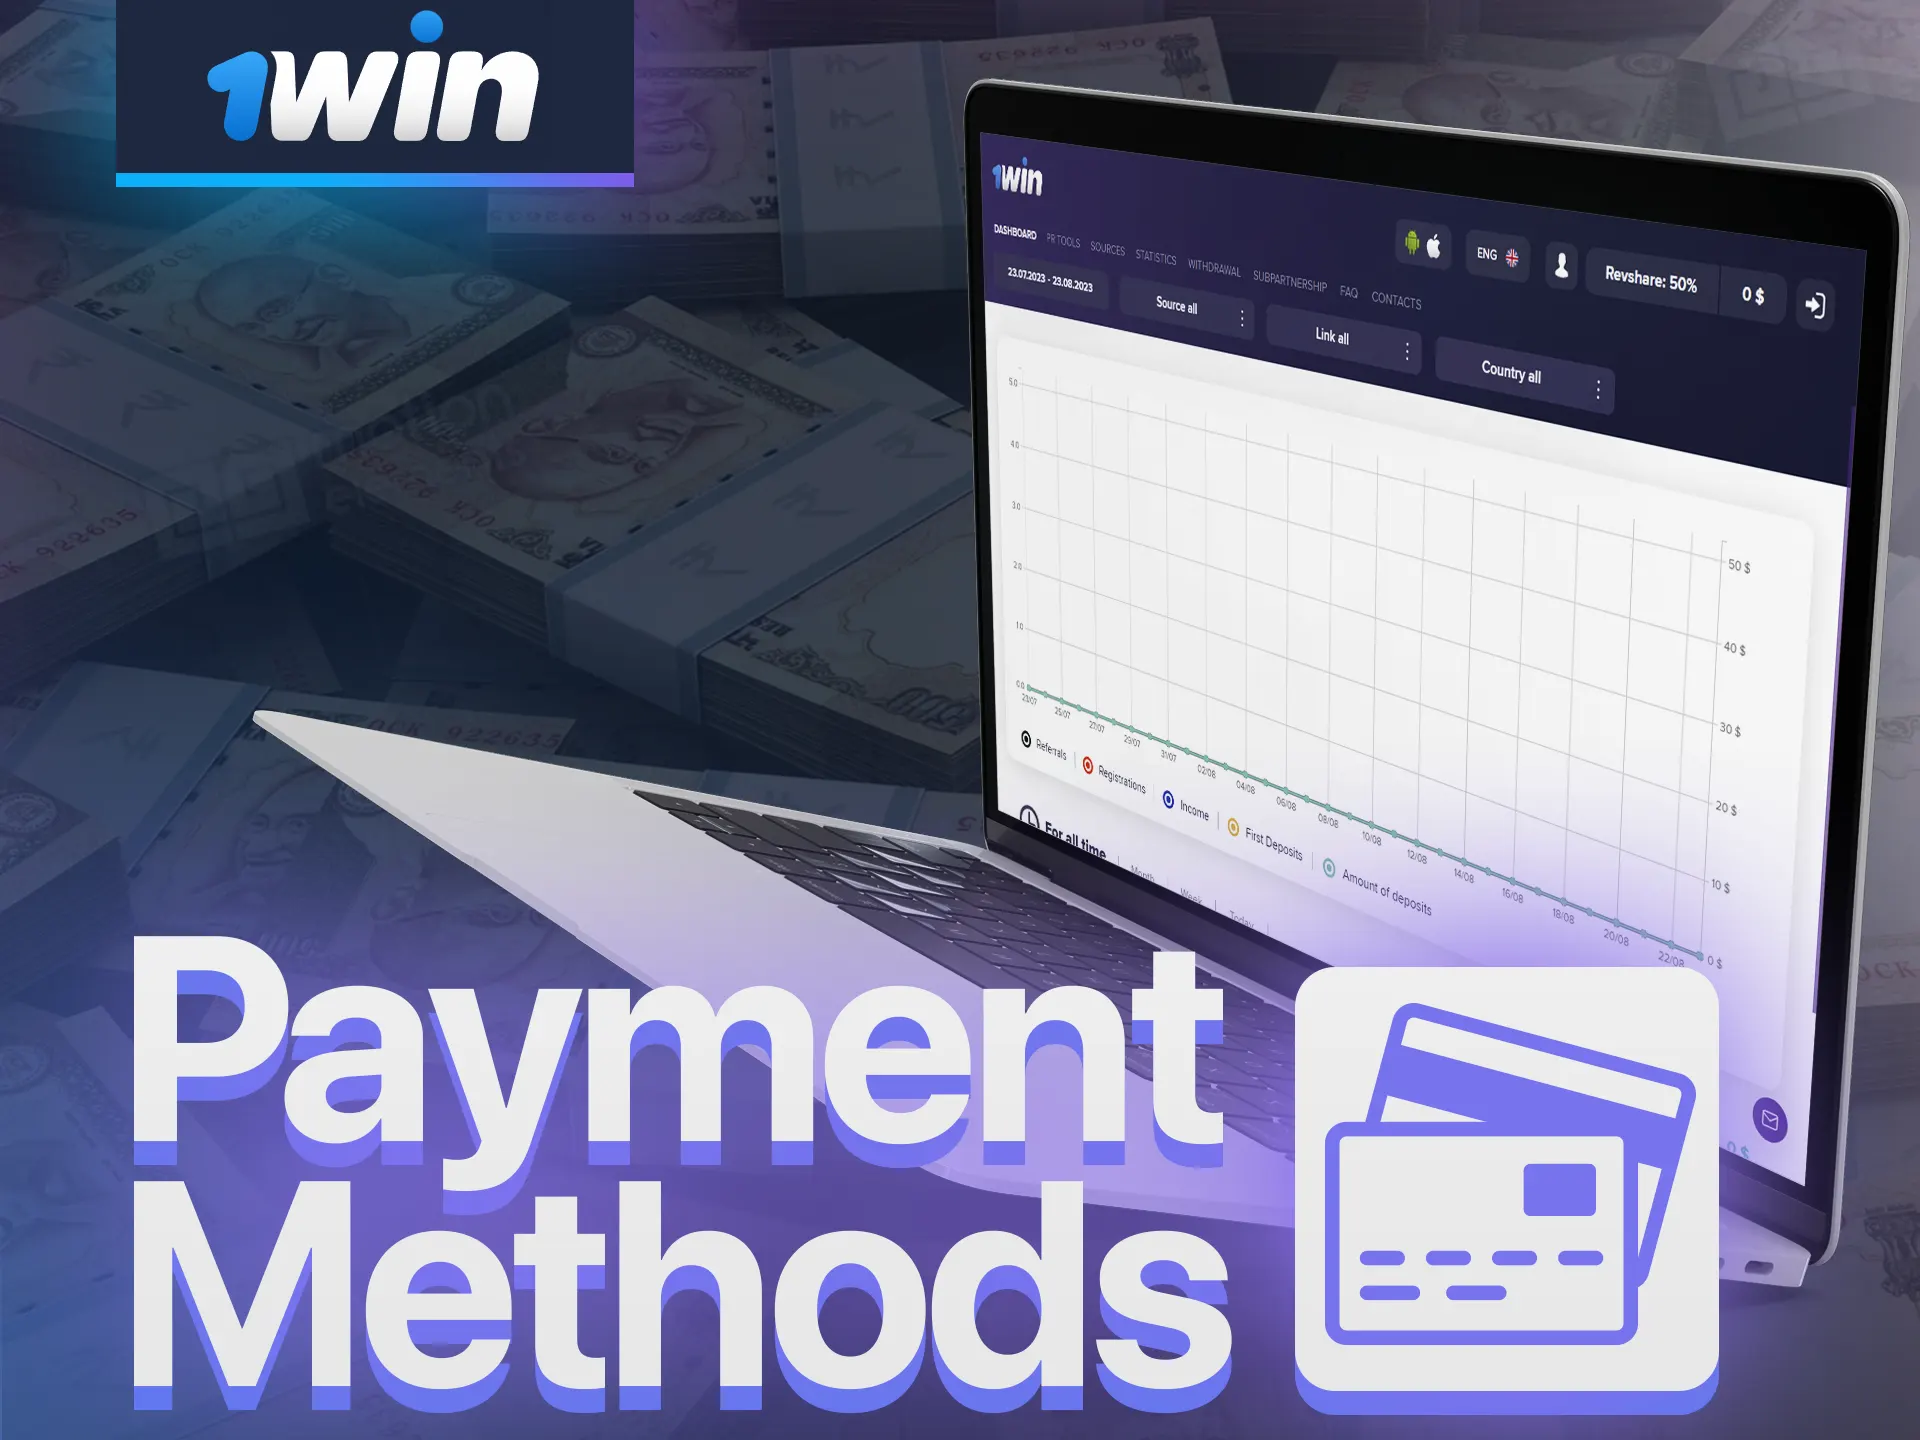 Get to know the payout options of the 1Win affiliate program.